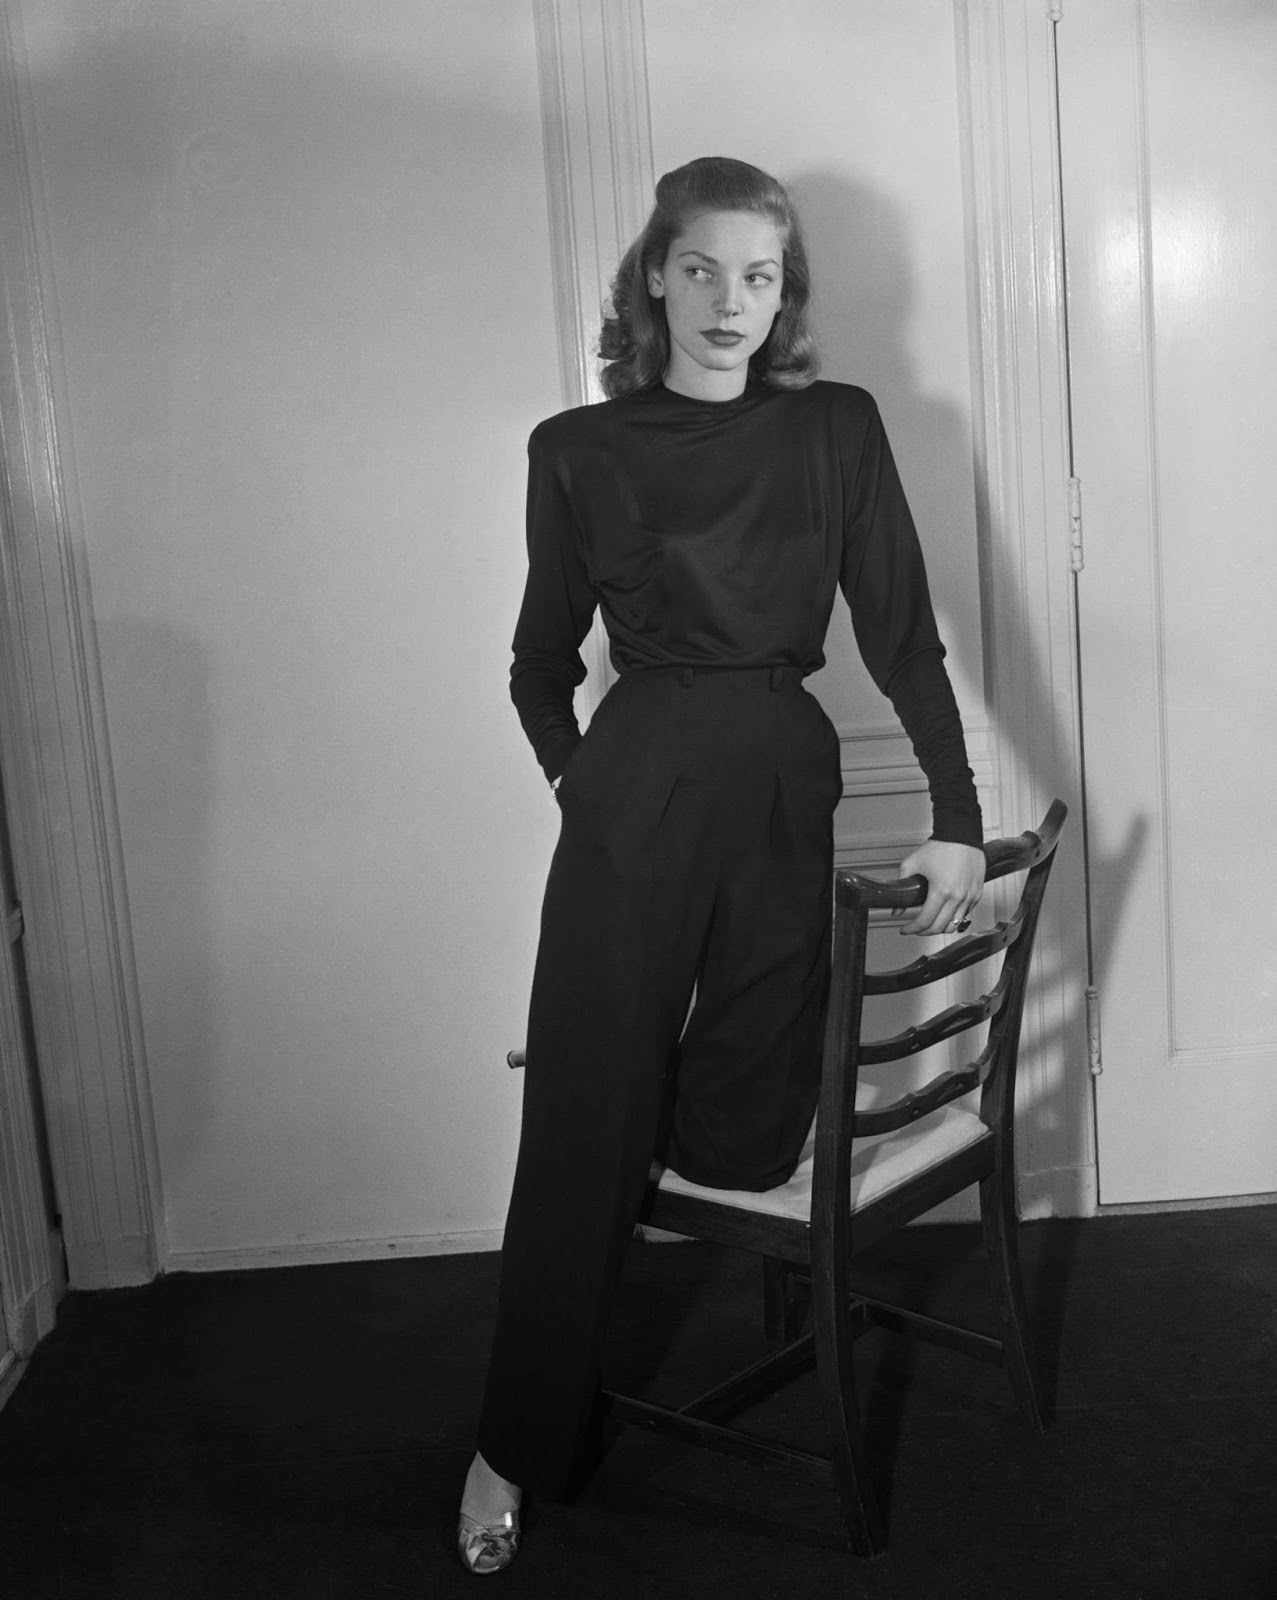 A photo shoot in 1945.